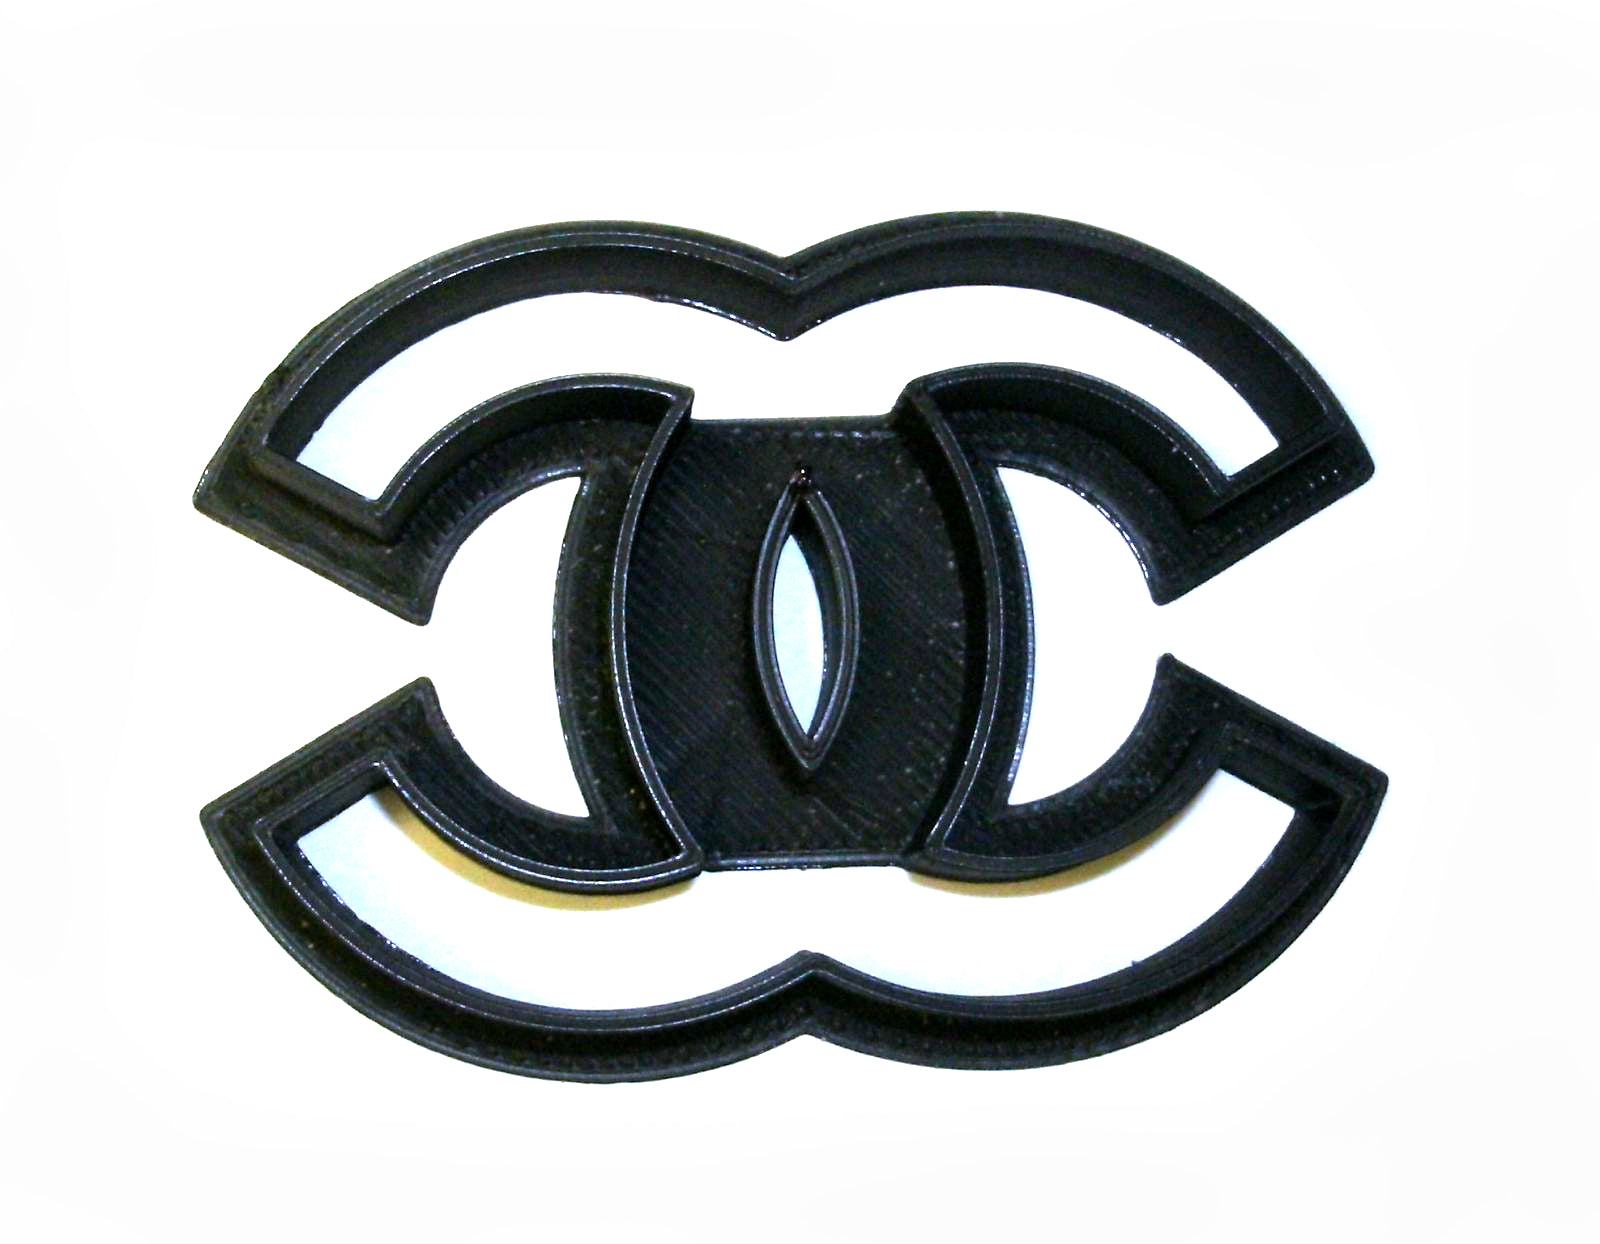 Coco Chanel Luxury Fashion Couture Brand Cookie Cutter USA PR843